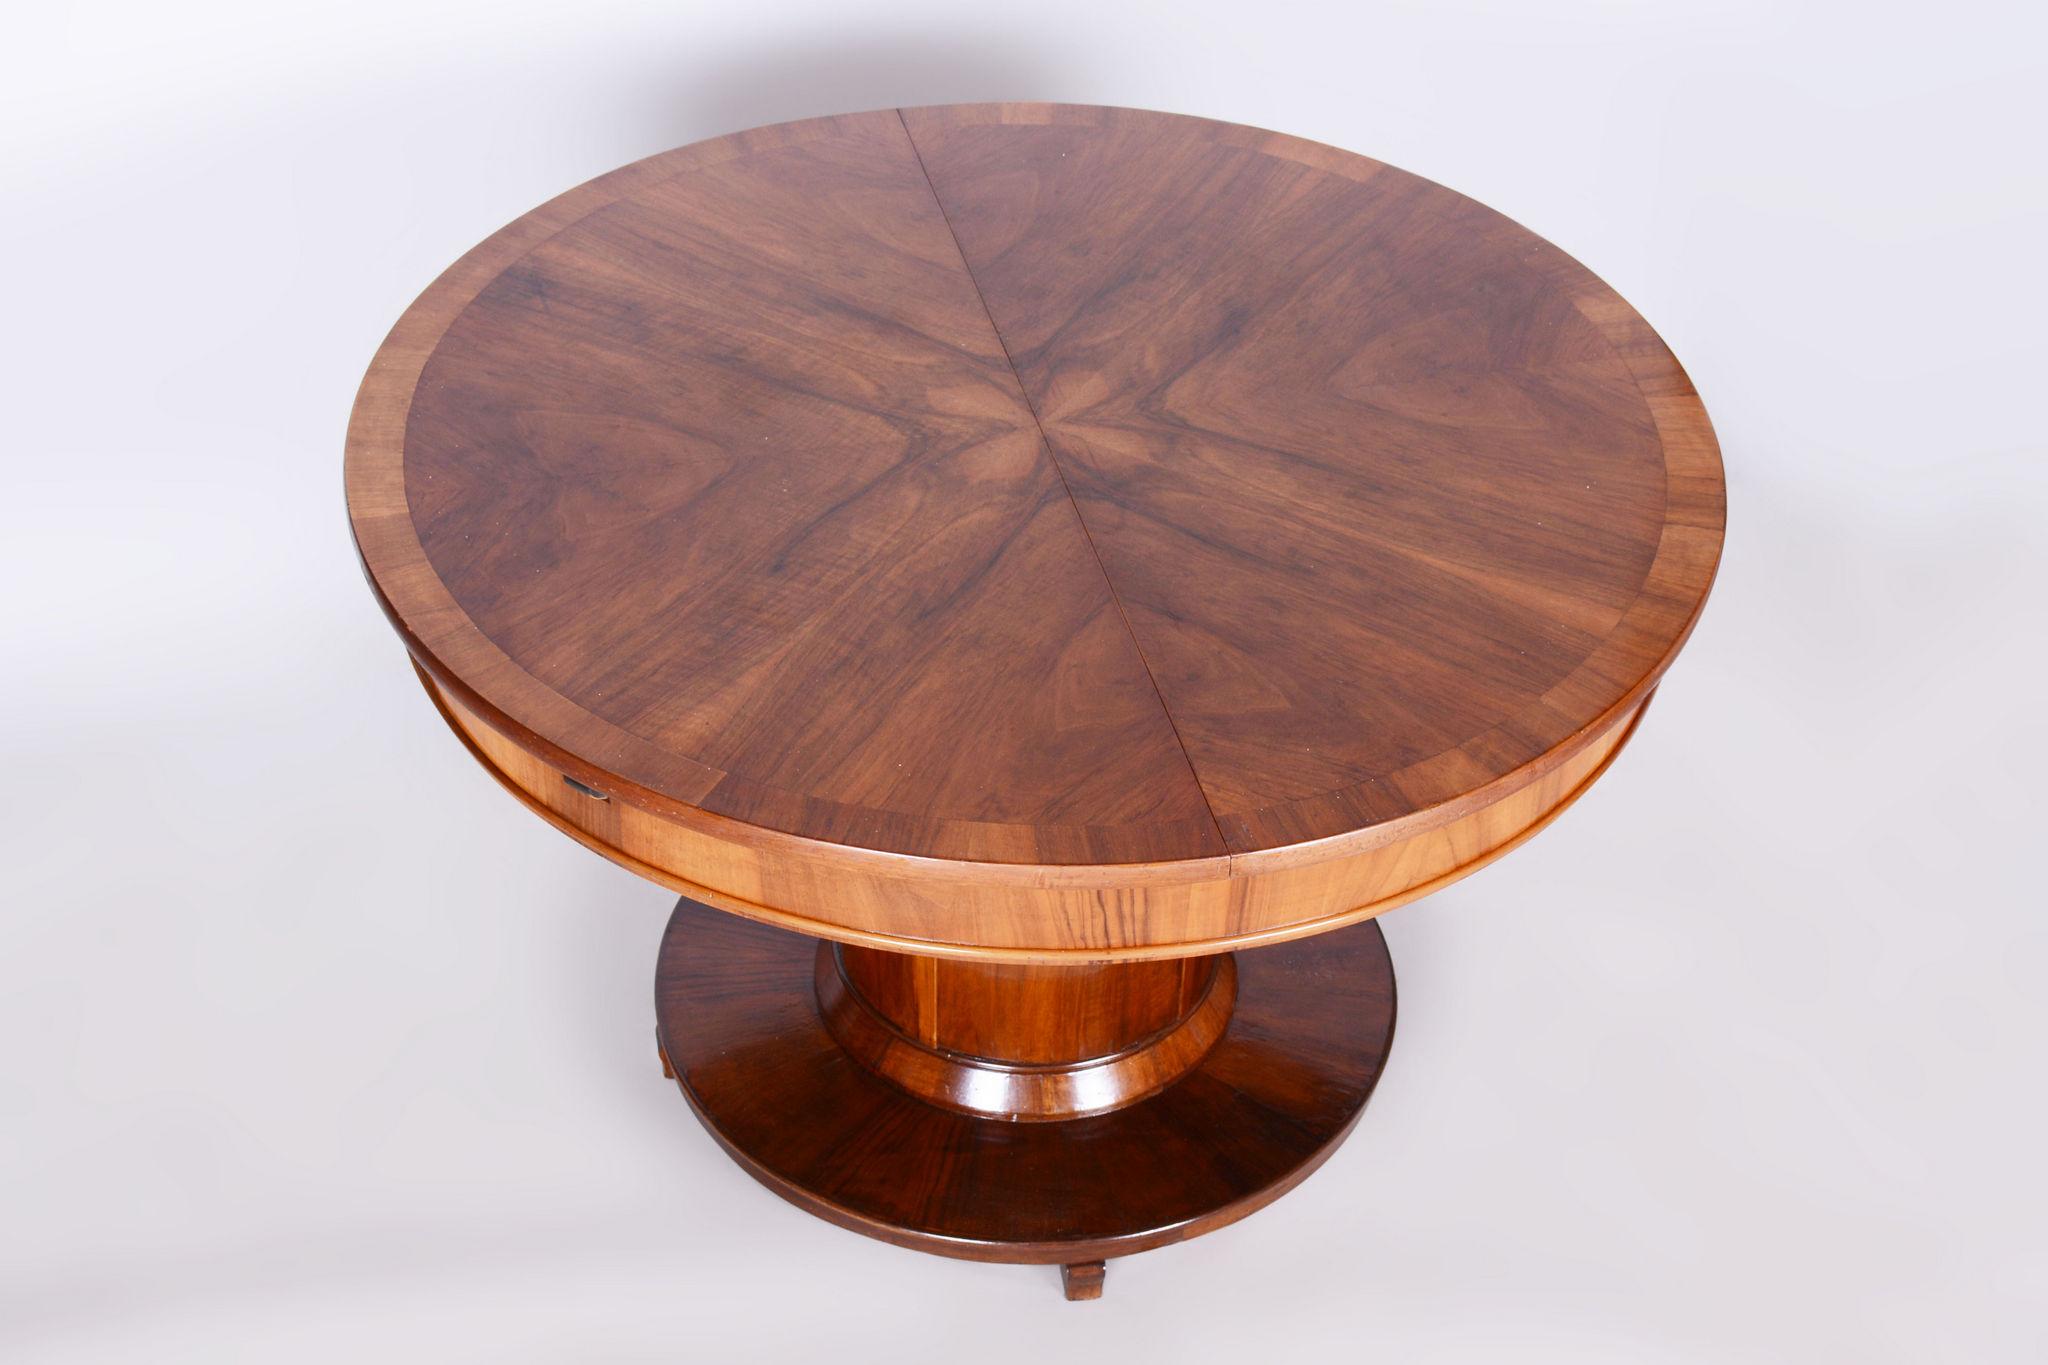 Restored Art Deco Folding Dining Table, Walnut, Spruce, Czech, 1920s In Good Condition For Sale In Horomerice, CZ